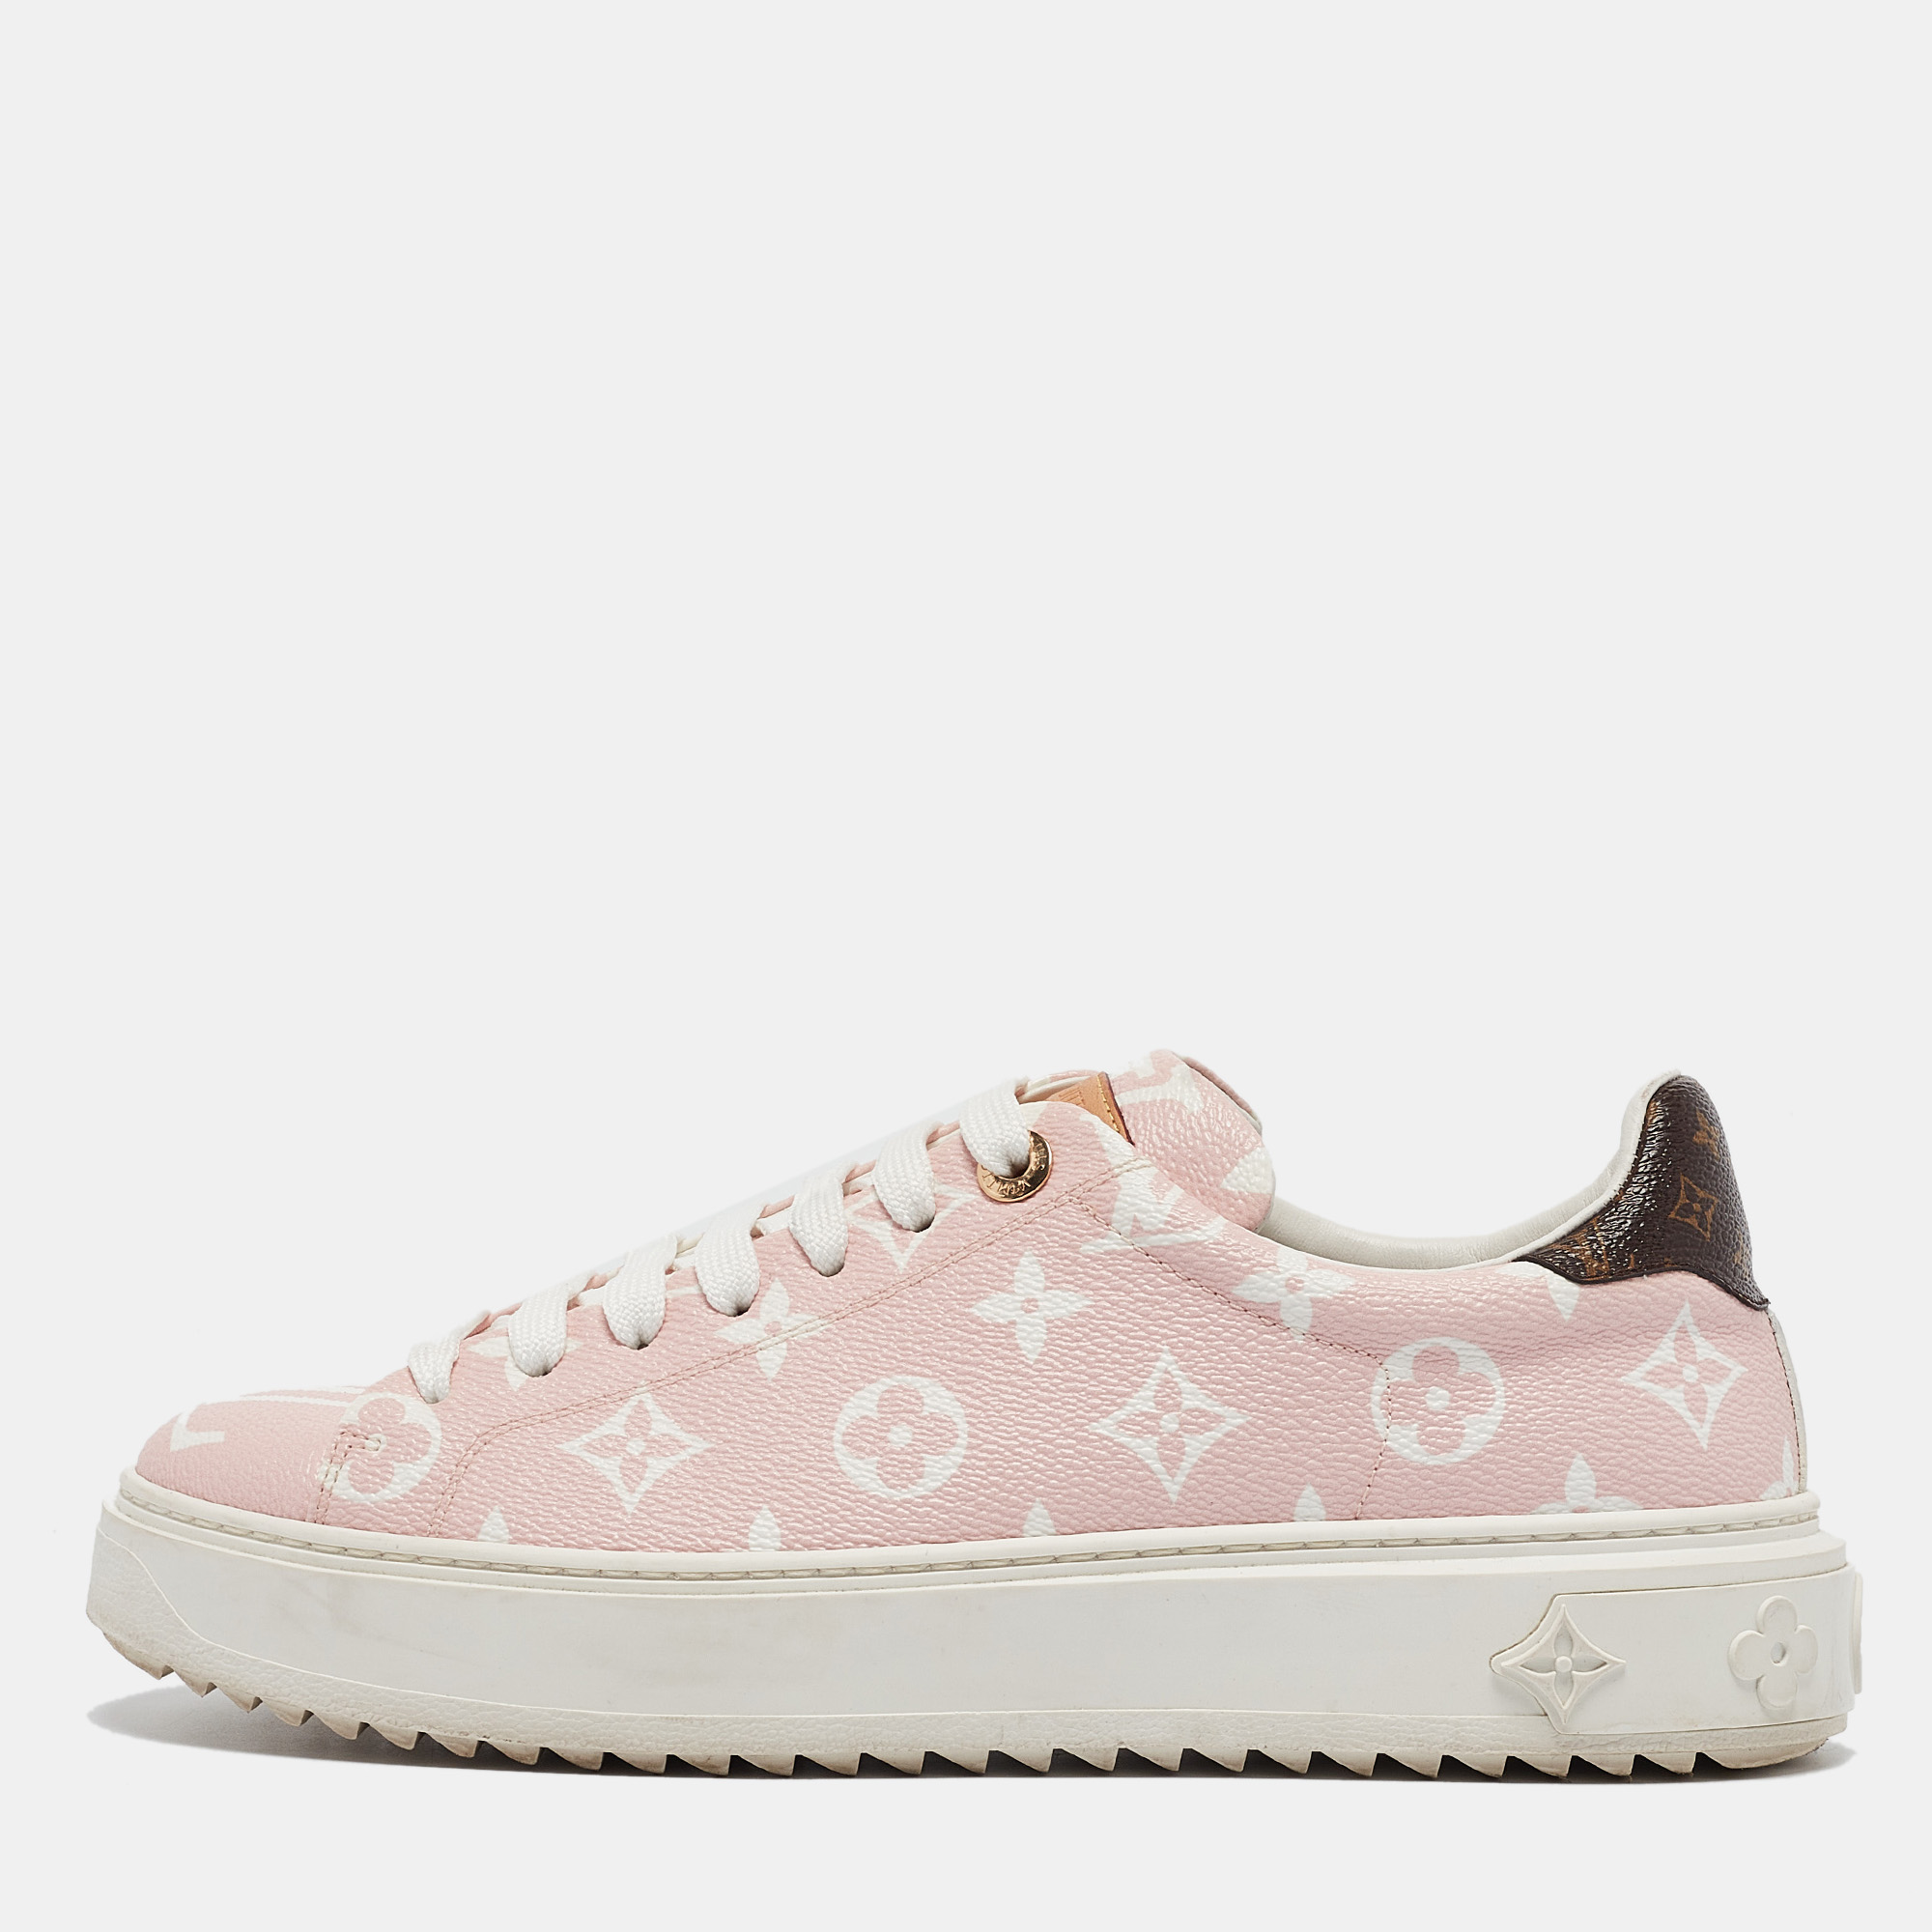 Louis vuitton pink monogram giant canvas time out sneakers size 39